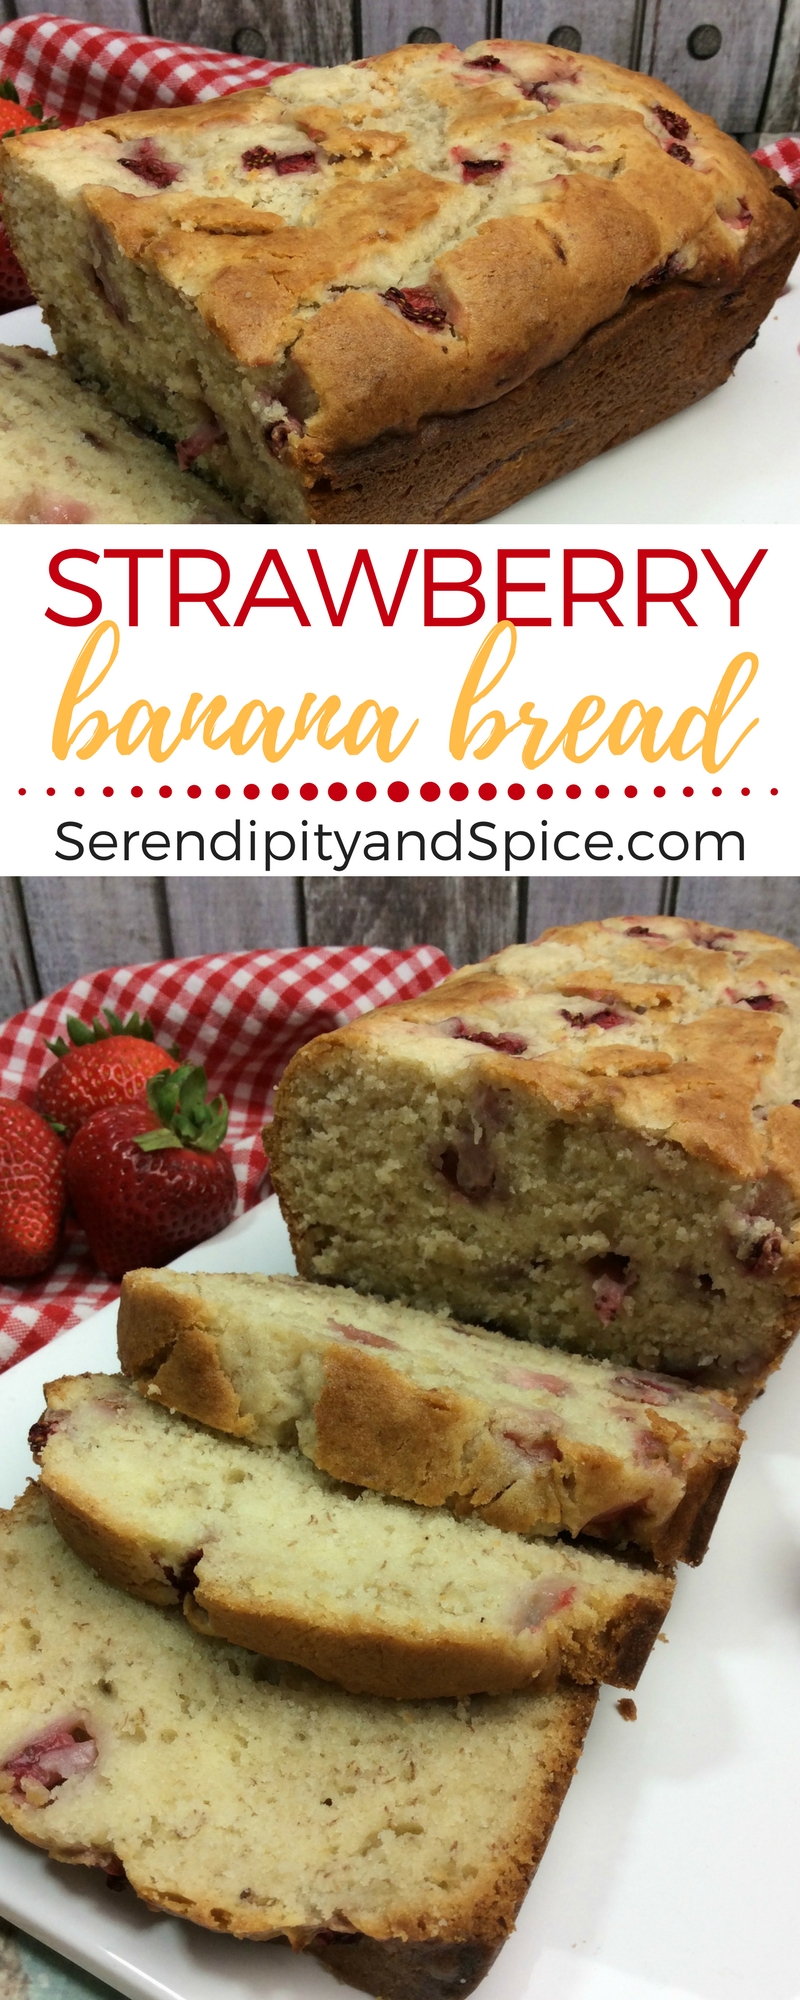 strawberry banana bread 1 Strawberry Banana Bread Recipe This Strawberry Banana Bread Recipe is a family favorite.  The sweet taste of banana bread with the tart addition of strawberries makes this Strawberry Banana Bread an easy recipe perfect for breakfast or dessert! A perfect recipe to bake with kids....baking with kids...